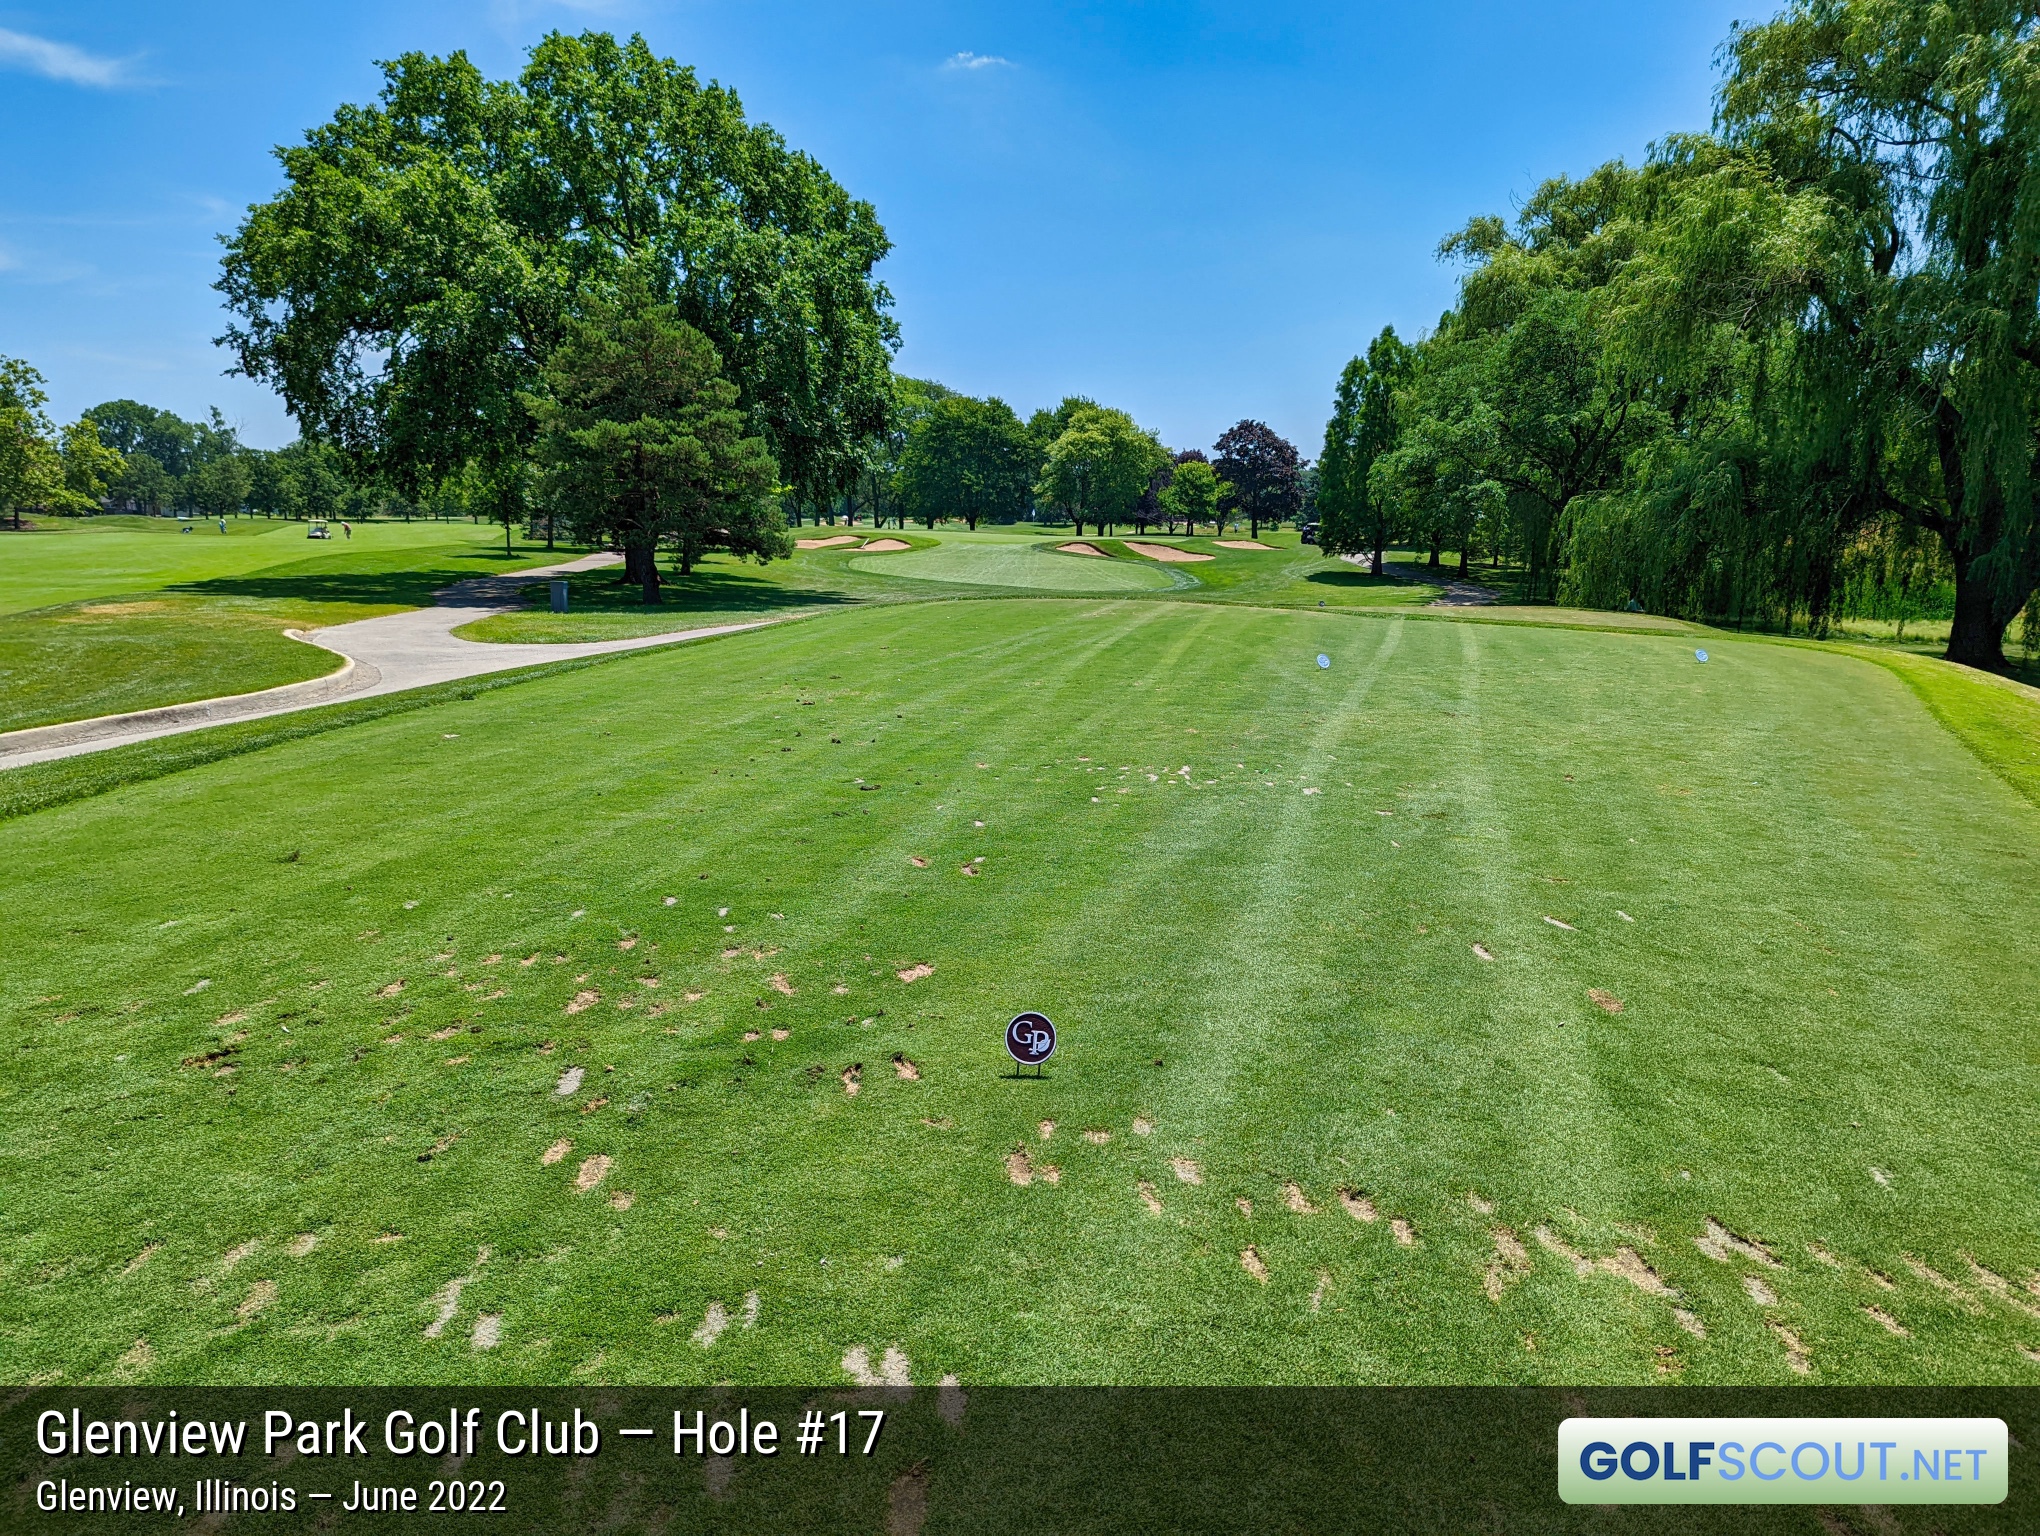 Photo of hole #17 at Glenview Park Golf Club in Glenview, Illinois. 